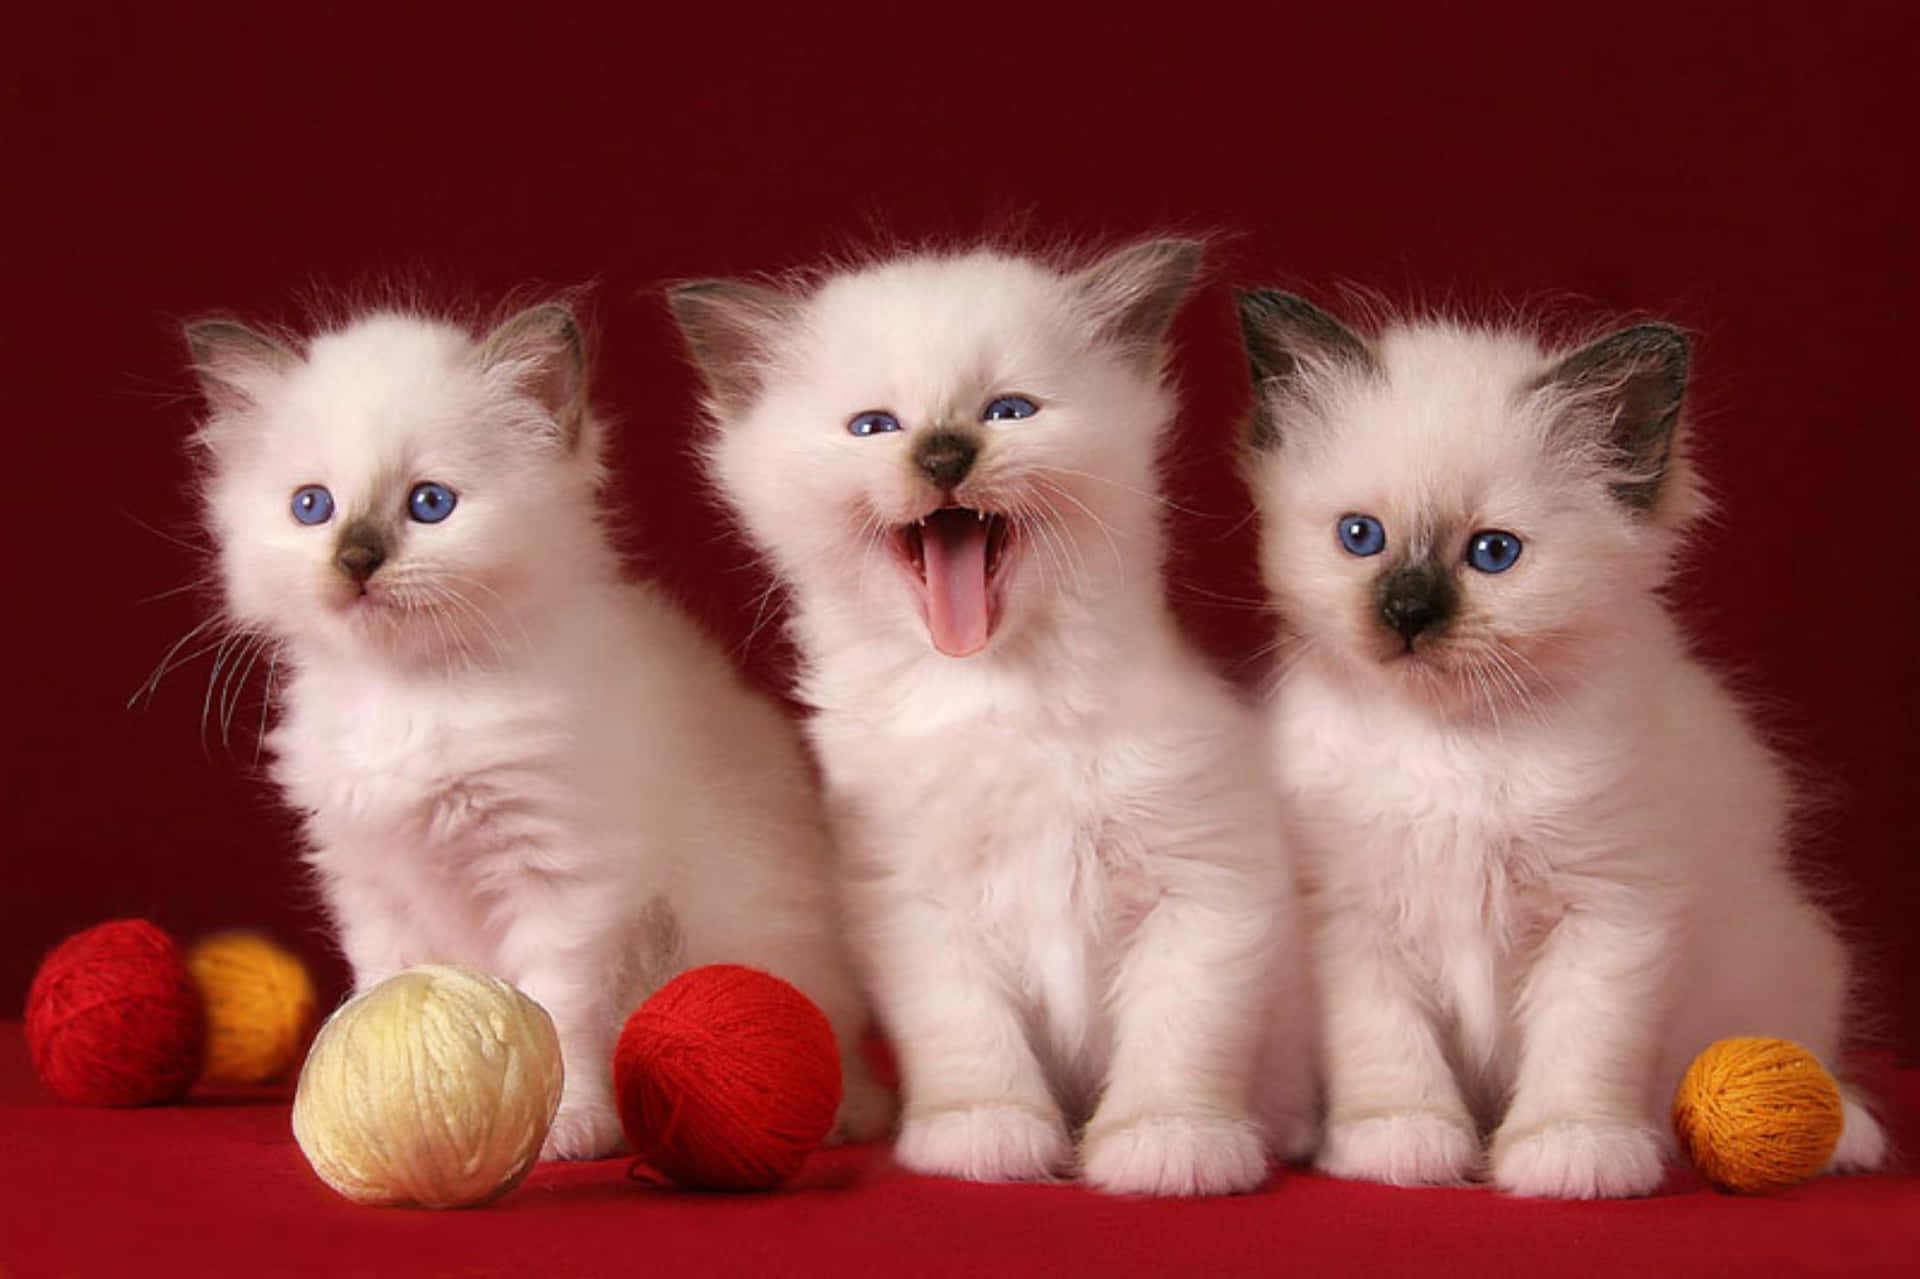 700+] Cute Cat Pictures | Wallpapers.com